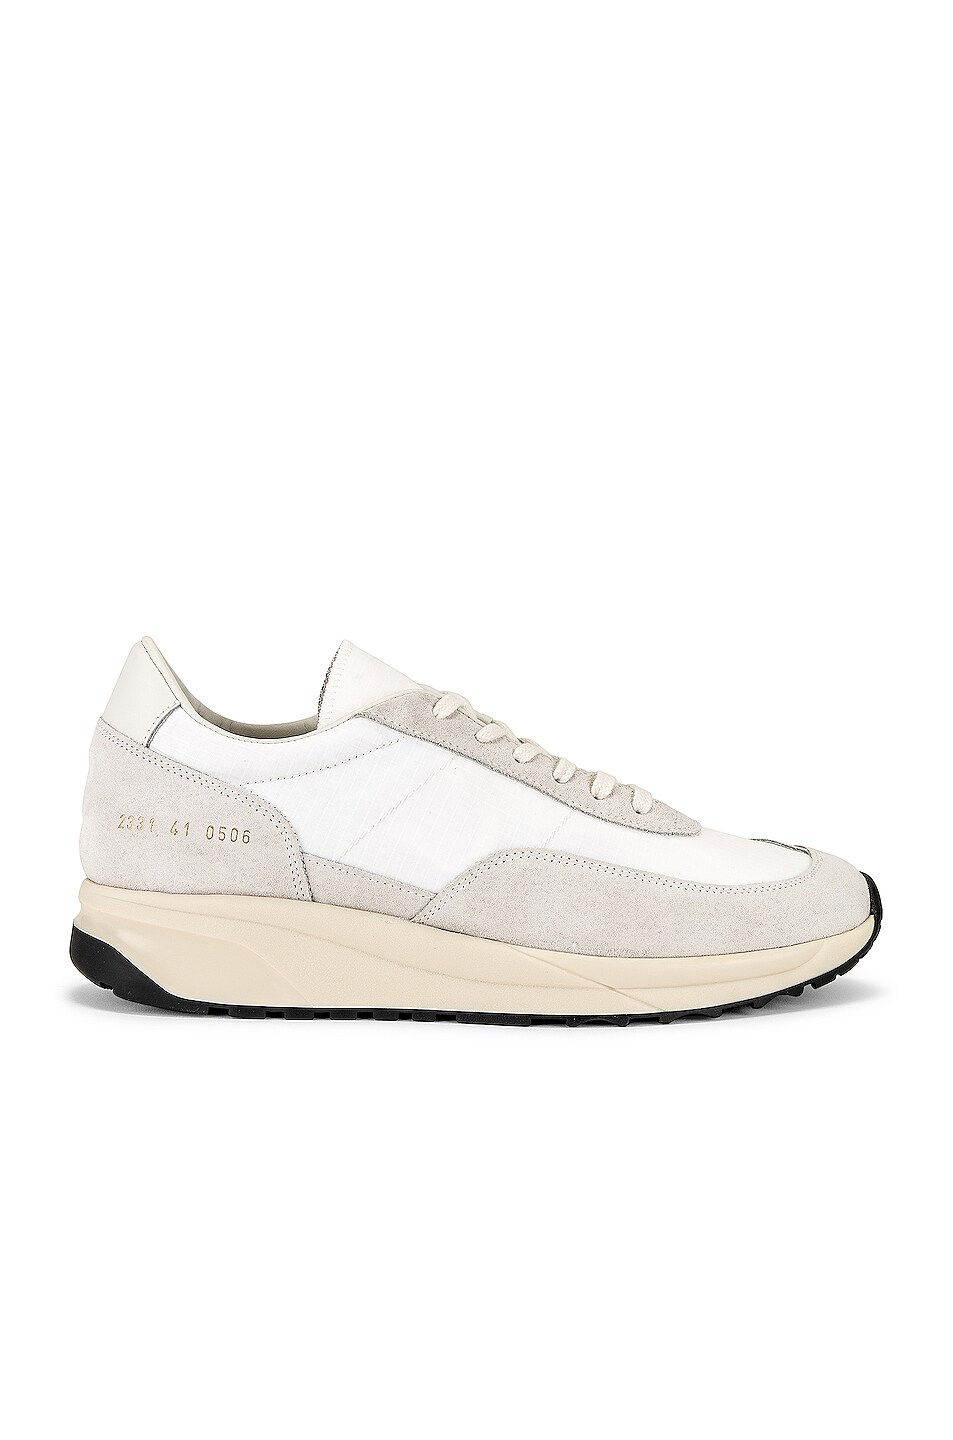 Common Projects Track 80 in White | FWRD